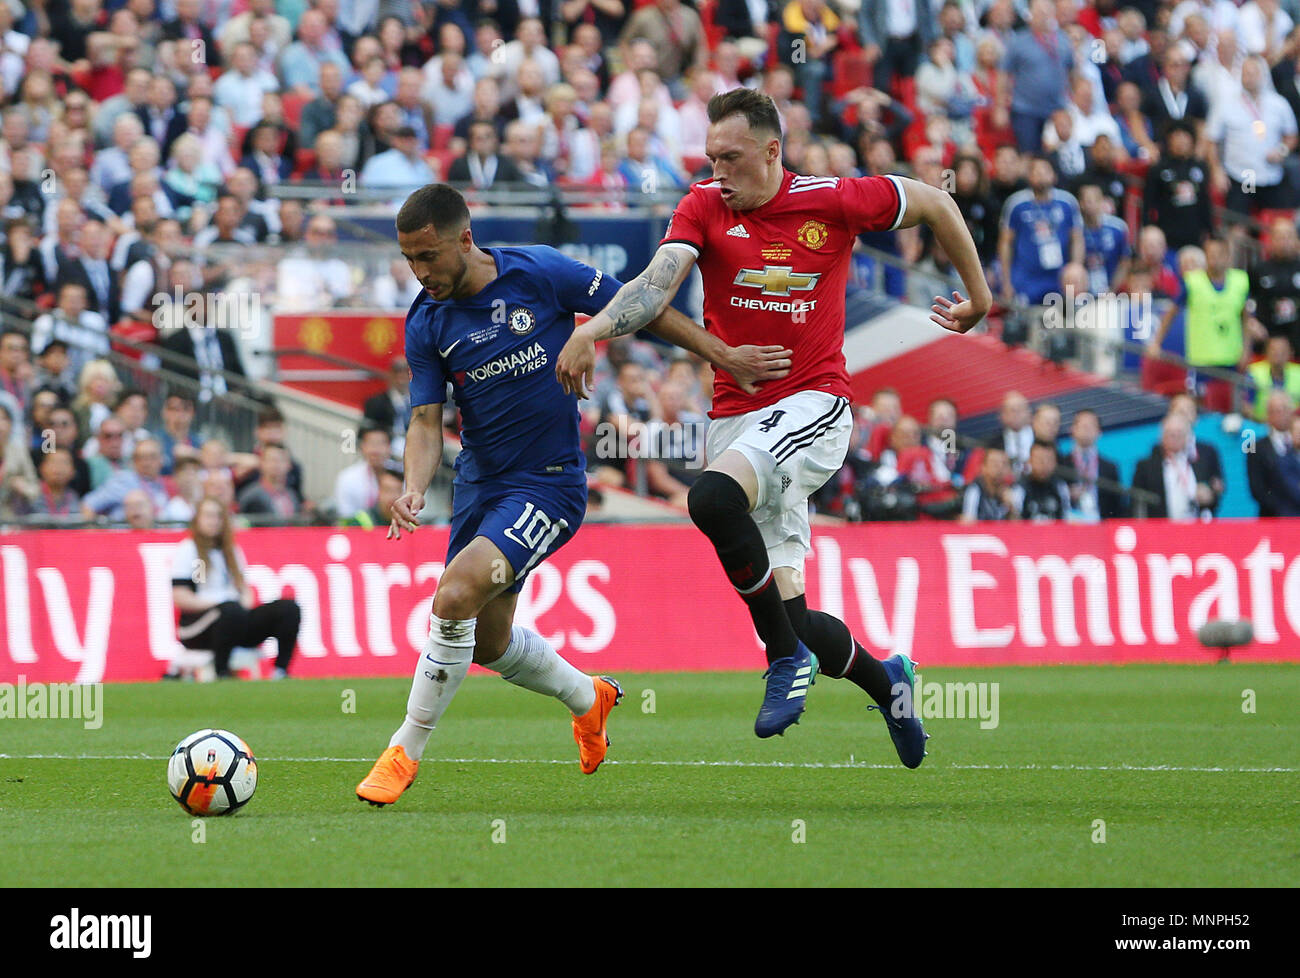 London, UK, 19 May 2018.   Eden Hazard of Chelsea is fouled by Phil Jones of Manchester United and wins a penalty during the FA Cup Final match between Chelsea and Manchester United at Wembley Stadium on May 19th 2018 in London, England. (Photo by Paul Chesterton/phcimages.com) Credit: PHC Images/Alamy Live News Credit: PHC Images/Alamy Live News Stock Photo